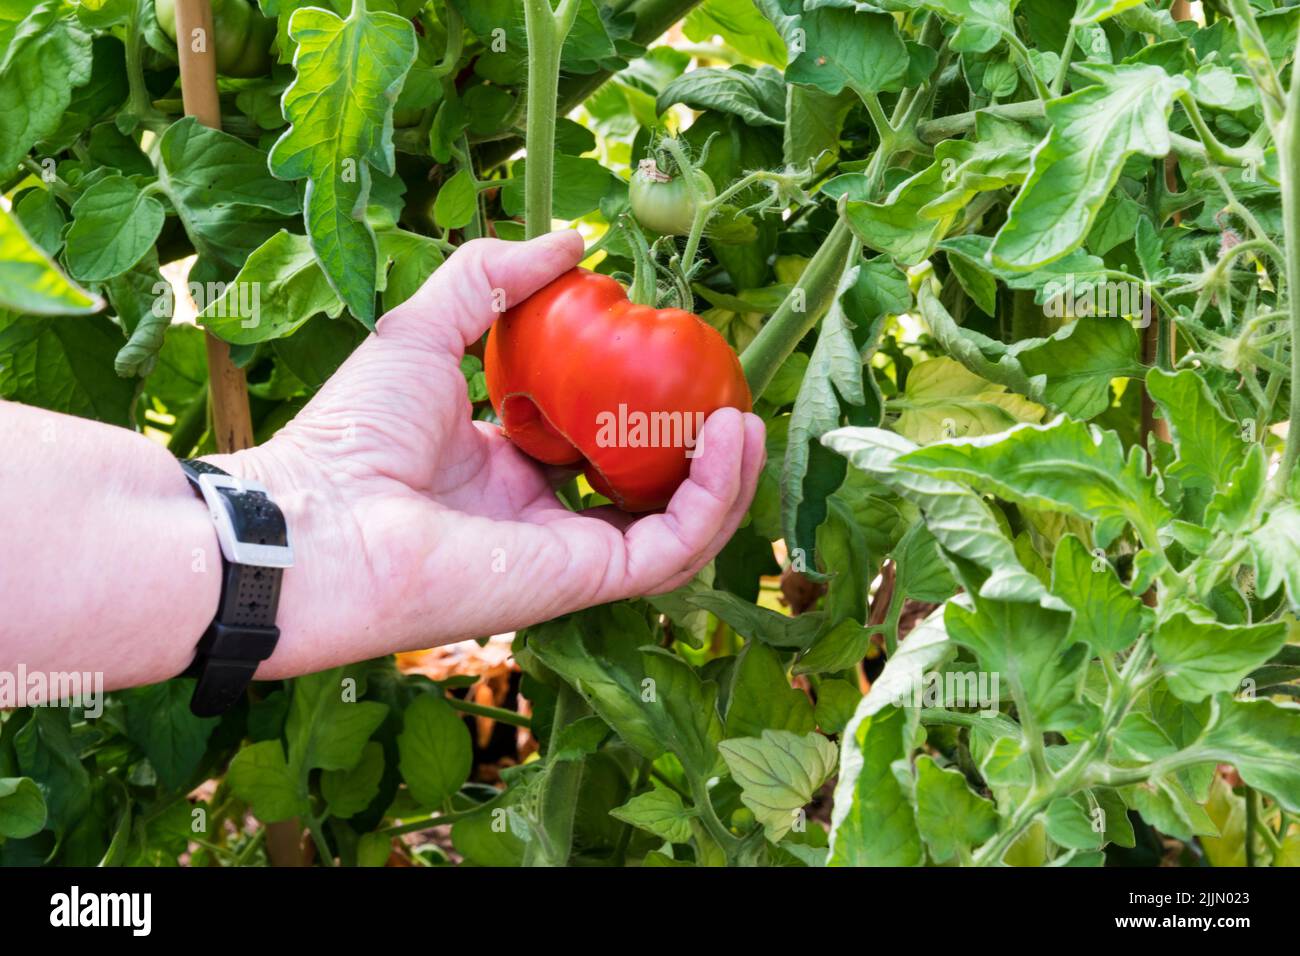 Woman picking Marmande tomato, Solanum lycopersicum, growing in her greenhouse. Stock Photo